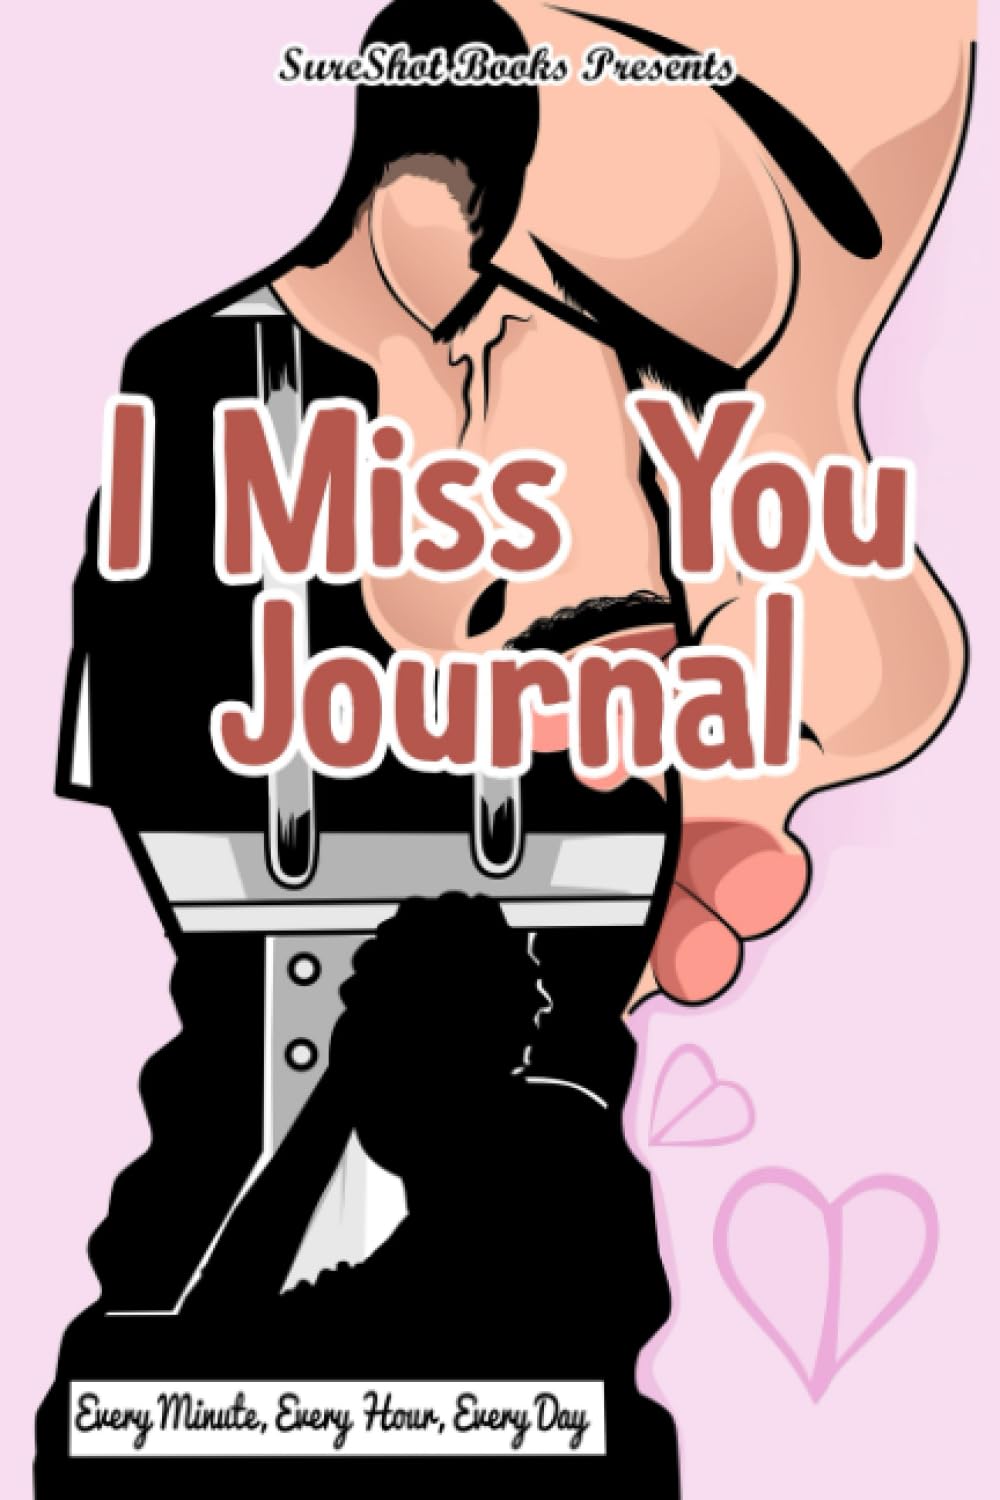 I Miss You Workbook For Inmates: Guided Journal With Prompts For Couples In Long Distance Relationships, Remember and share your favorite Moments with ... Book with space to write letters, 116 Pages - SureShot Books Publishing LLC